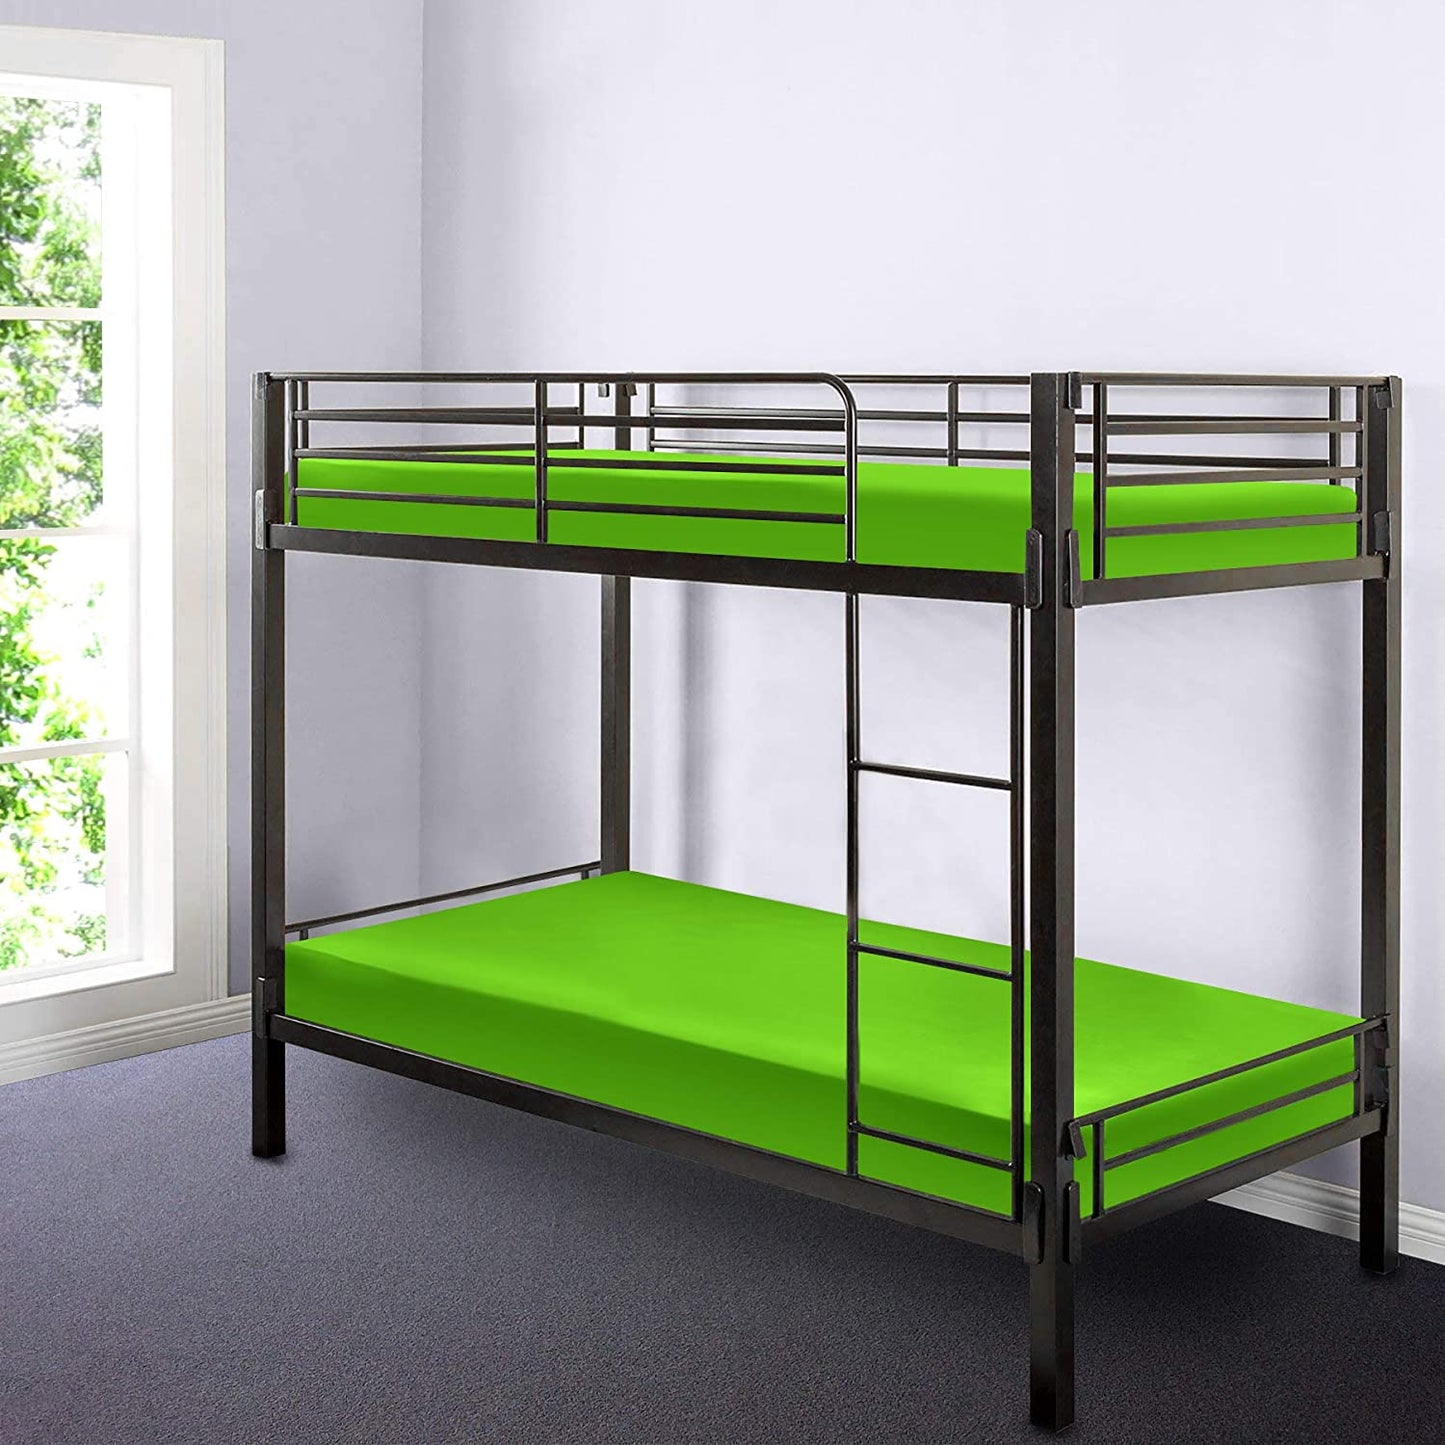 Gilbins Cot Size 30" x 75" Fitted Sheet, Made of Ultra Soft Cotton, Perfect for Camp Bunk Beds / RVs / Guest Beds Neon Green